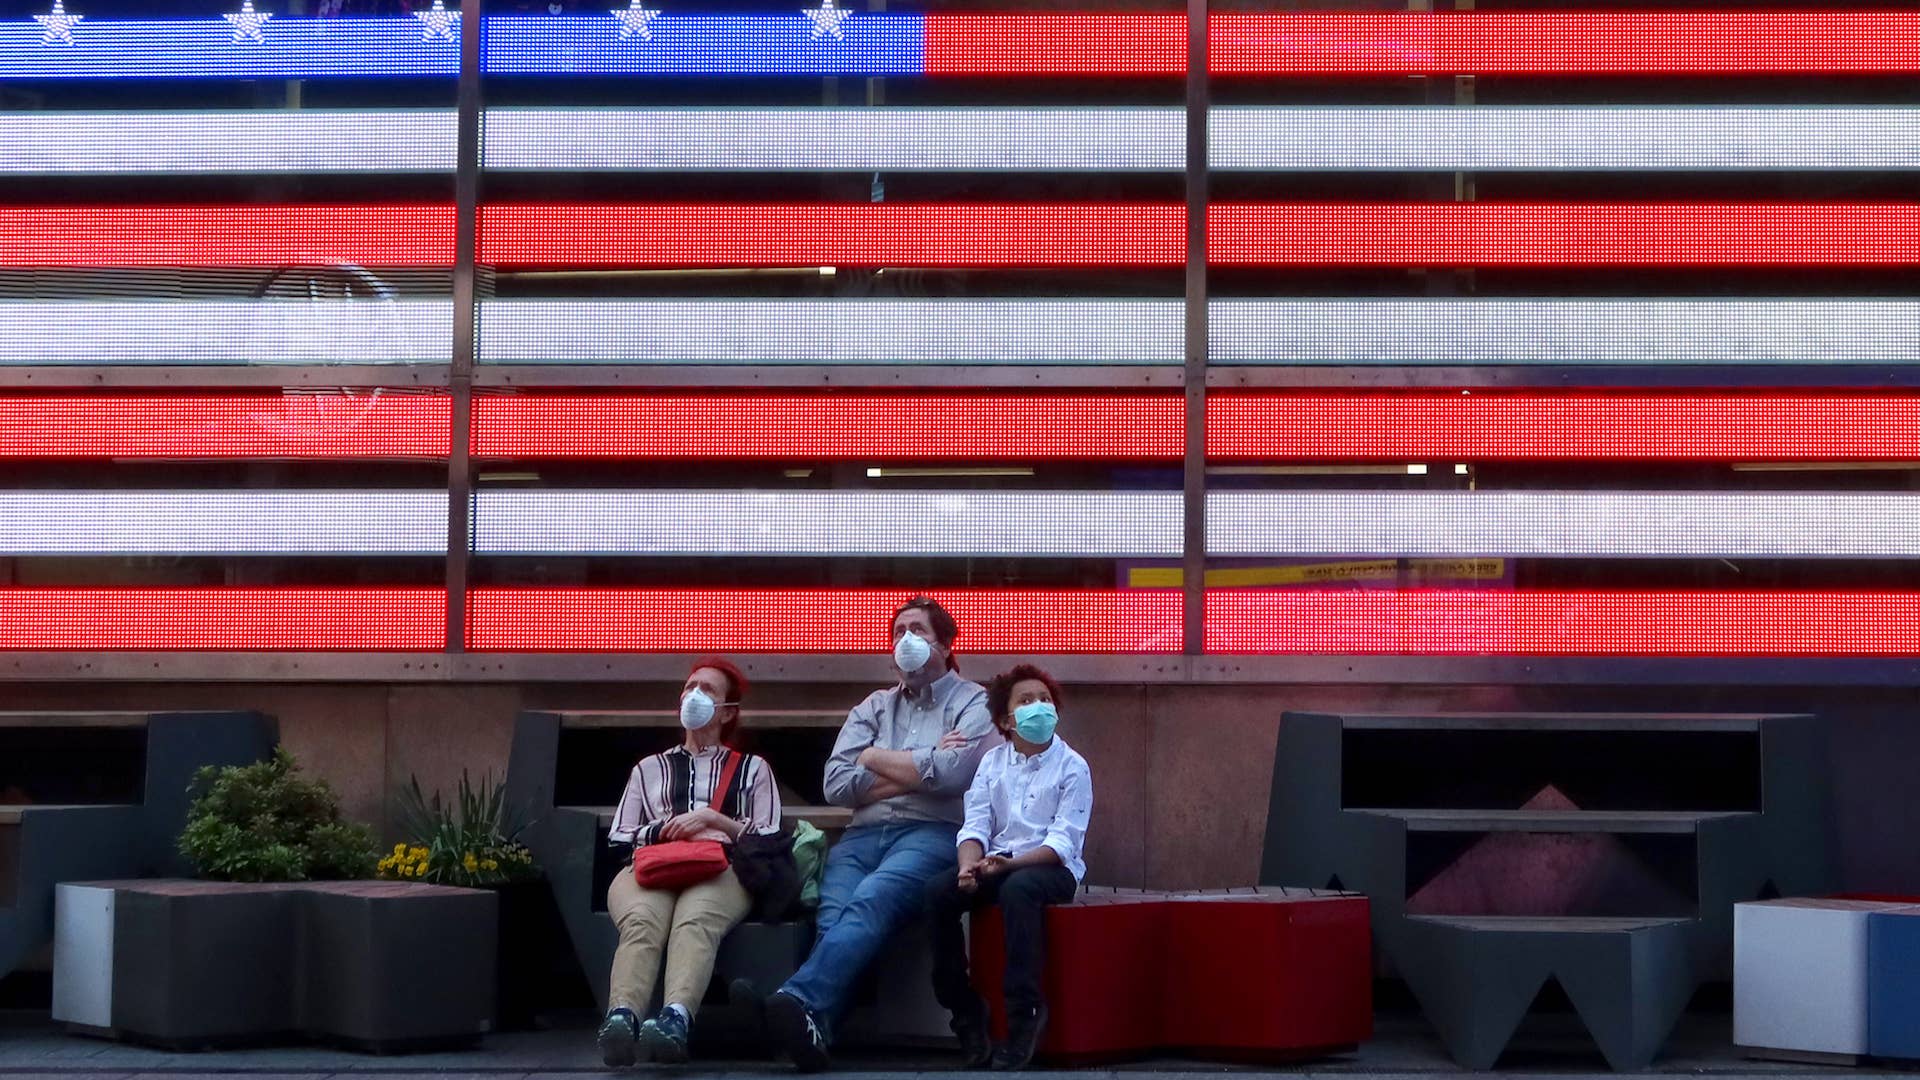 People wear masks as they sit in under an American flag in Times Square .